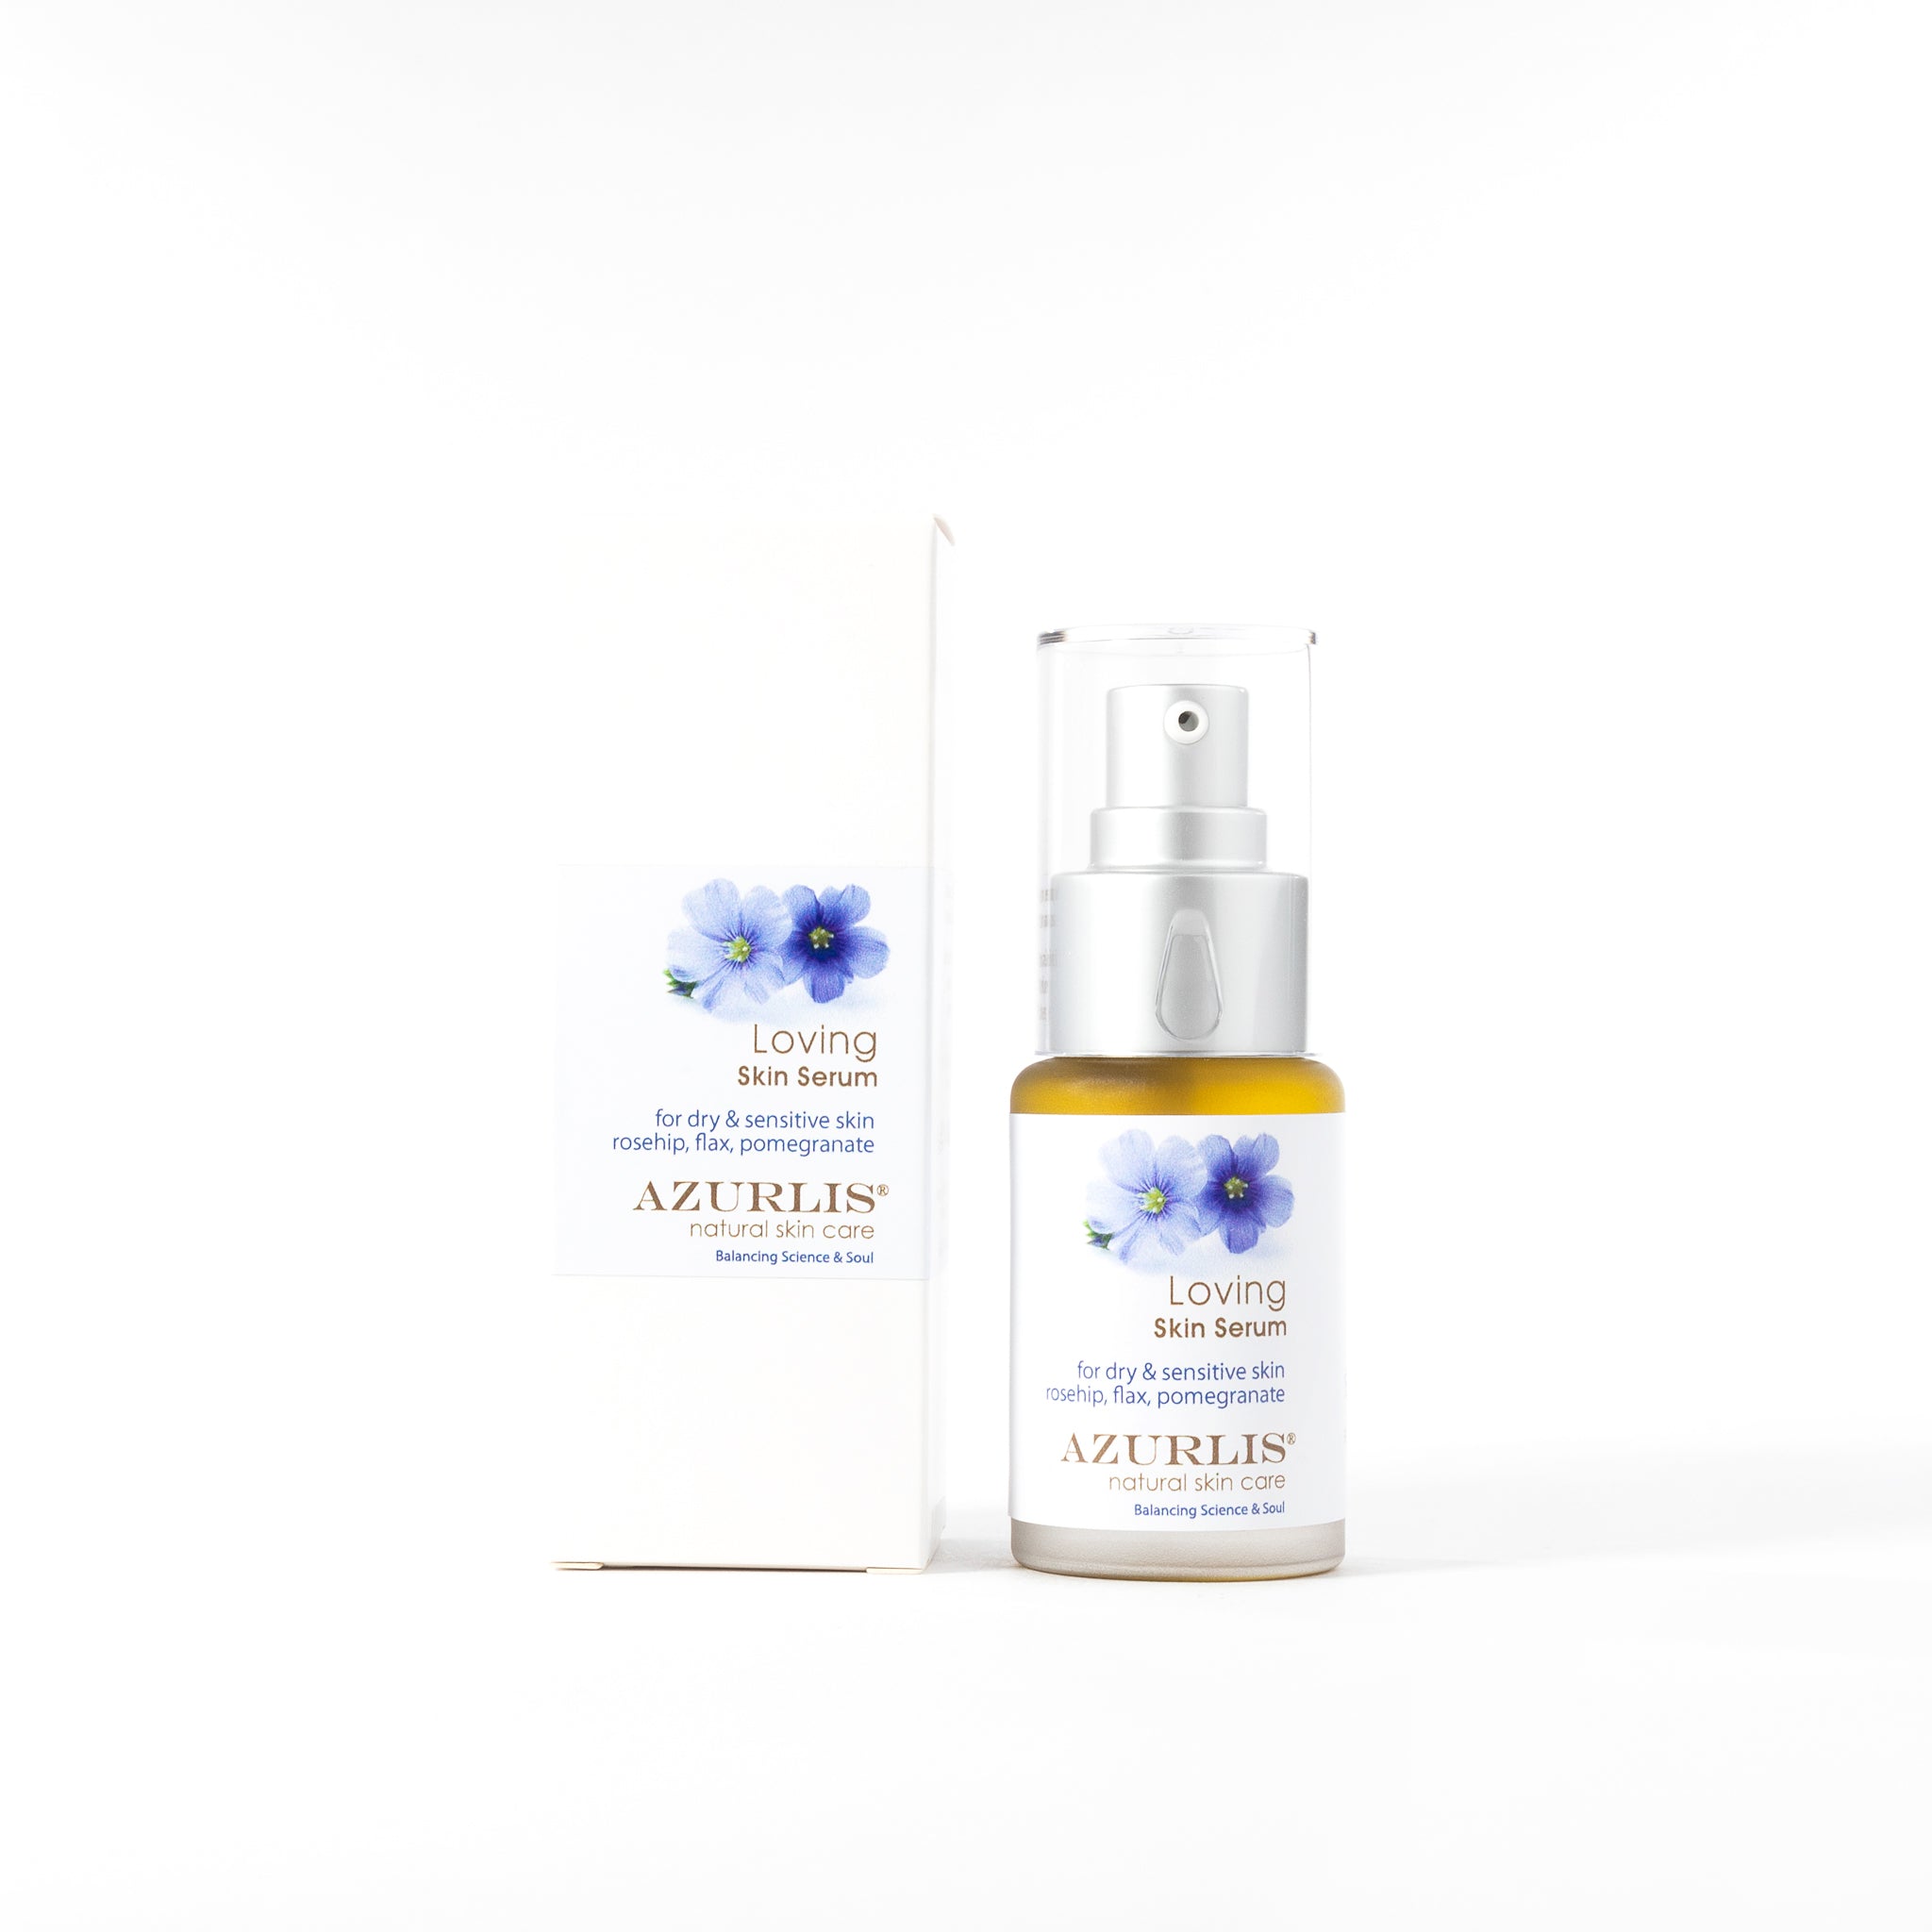 Azurlis™ Loving Skin Serum 30ml is for dry and sensitive skin. This serum is composed of extremely gentle oils that are deeply penetrating to maintain hydration of the skin without an oily feeling.